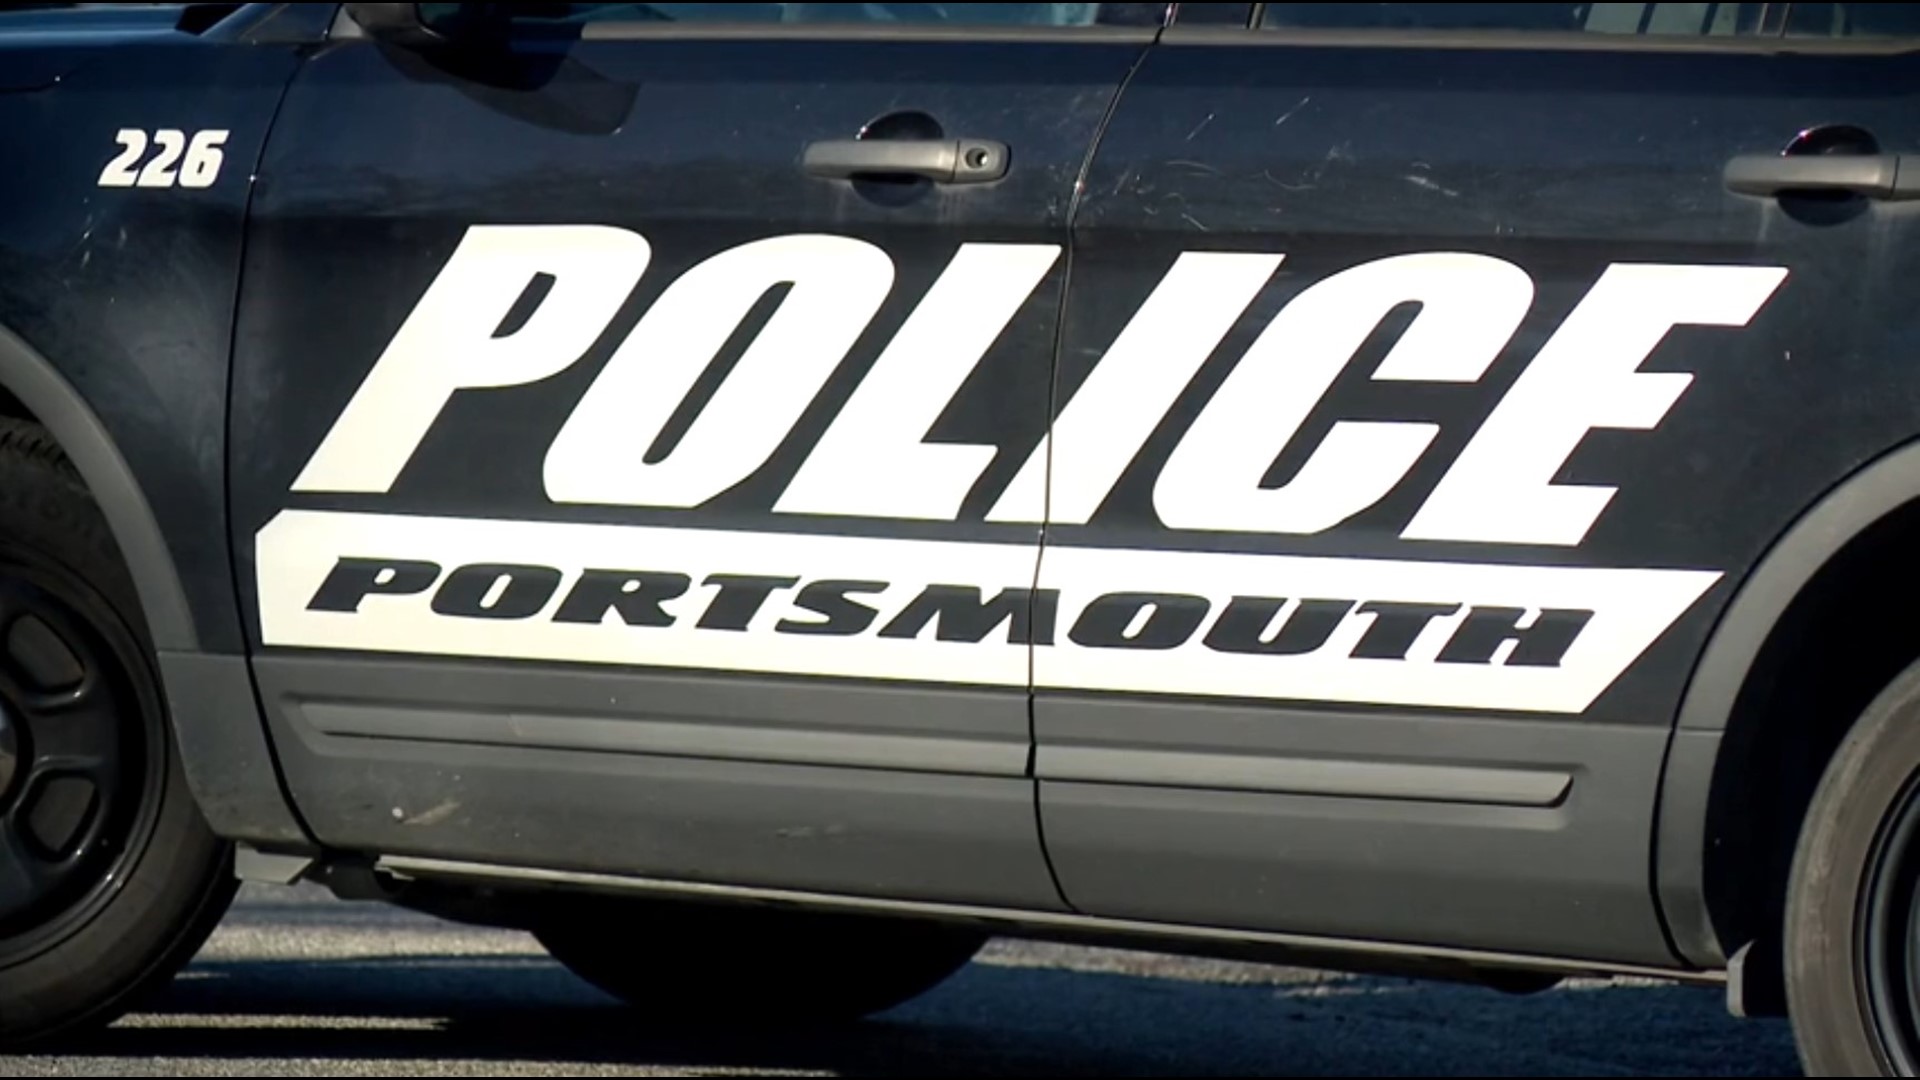 Portsmouth police say they responded to a call for a shooting in the 500 block of Edwards Street near the Norfolk Naval Shipyard Wednesday around 11:30 p.m.